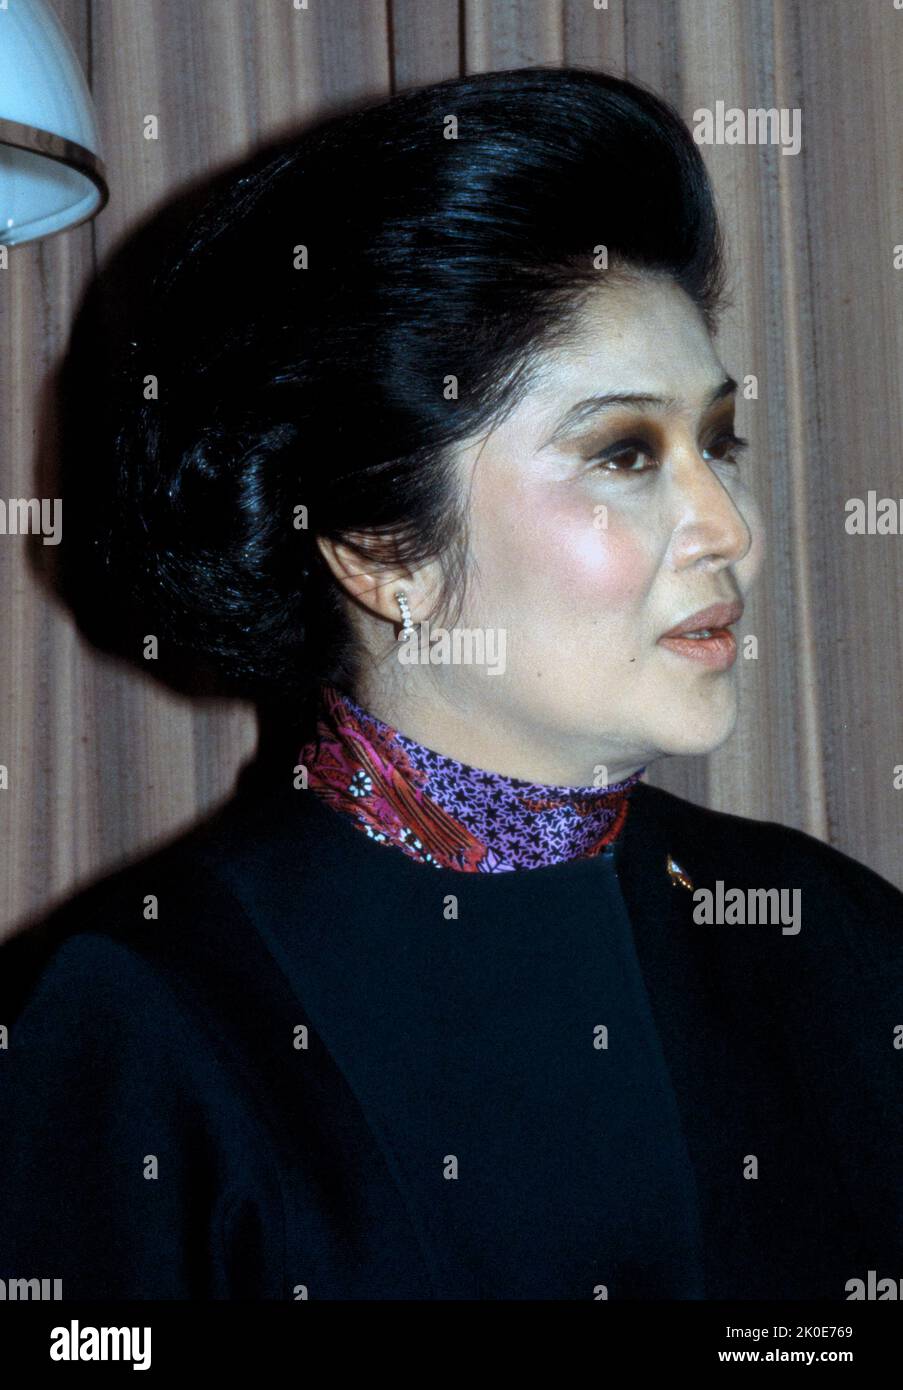 Imelda Marcos (born 1929) Filipina politician and convicted criminal who was First Lady of the Philippines for 21 years, during which she and her husband Ferdinand Marcos stole billions from the Filipino people. Stock Photo